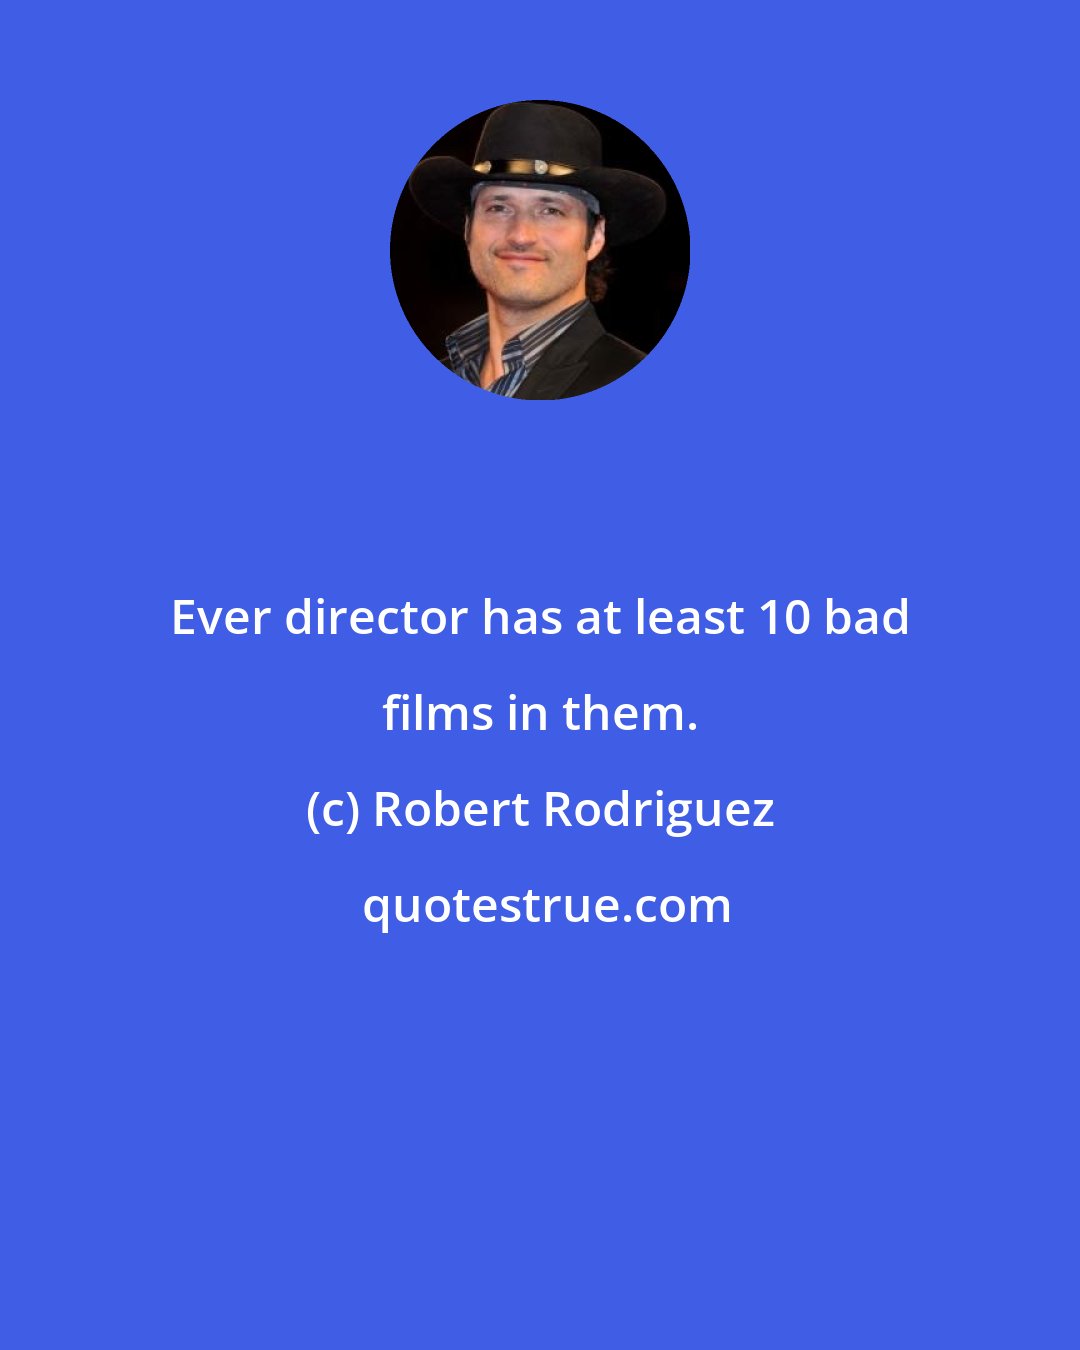 Robert Rodriguez: Ever director has at least 10 bad films in them.